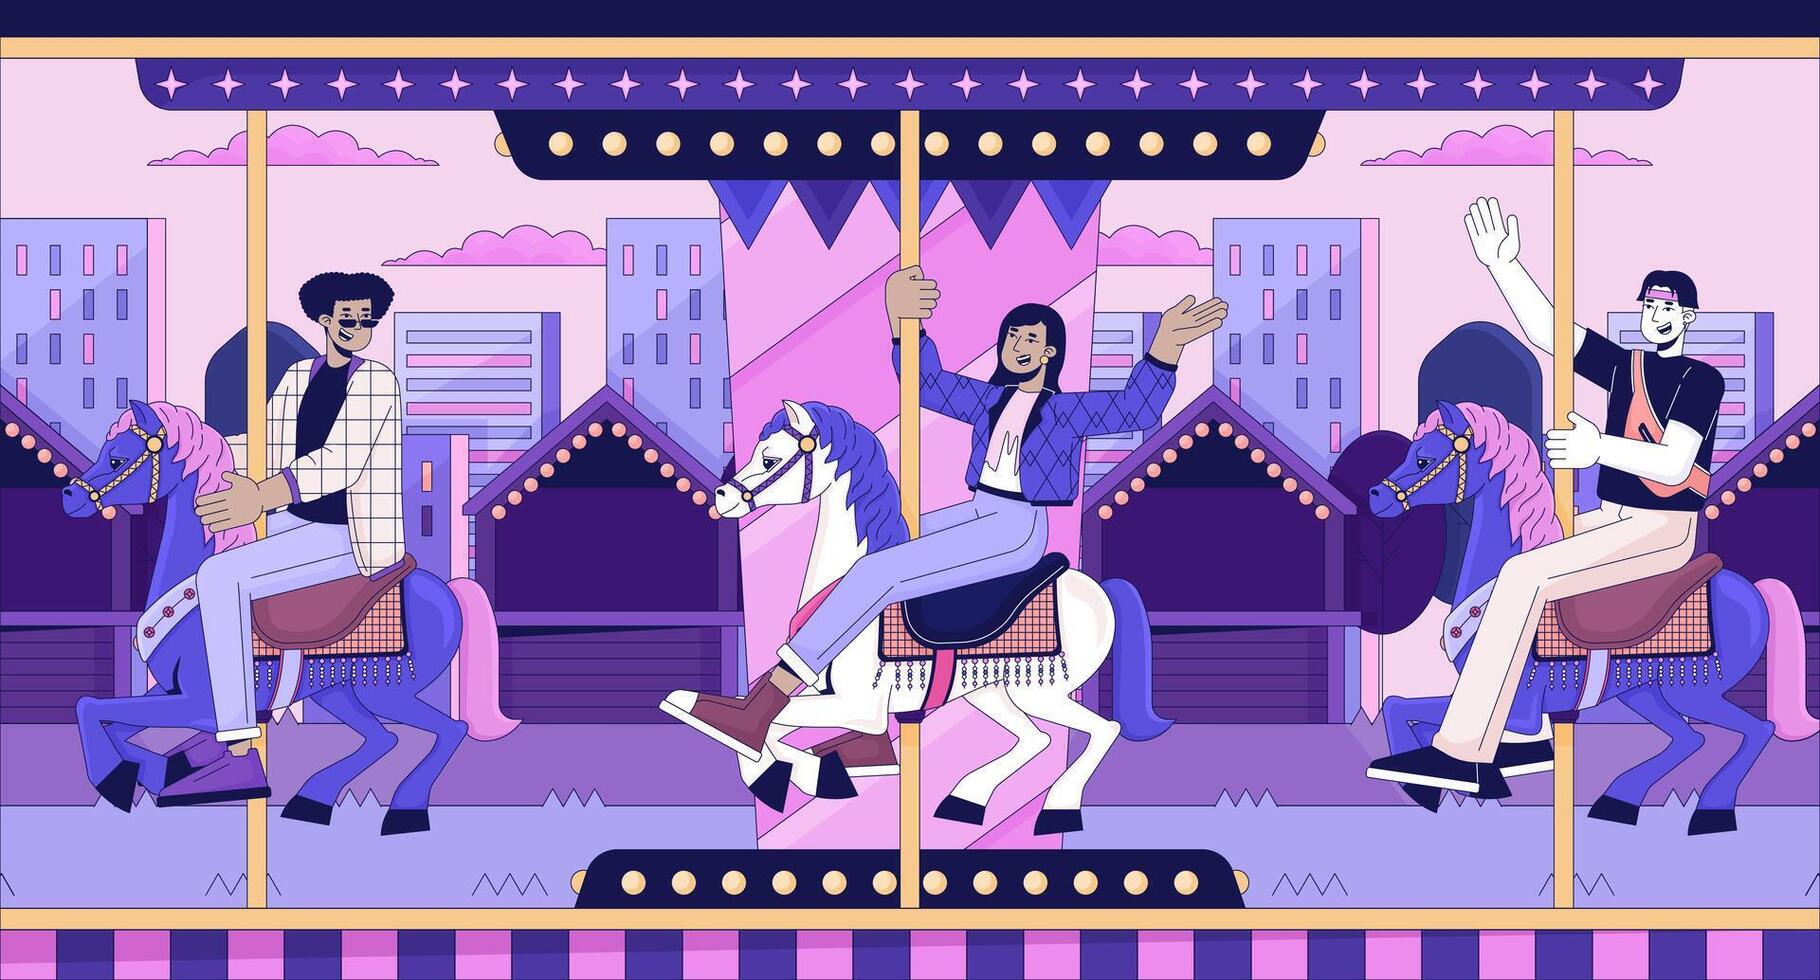 Friends on carousel amusement park line cartoon flat illustration. Roundabout fun diverse young adults 2D lineart cityscape background. Fair merry-go-round. Lo fi vibes scene vector color image